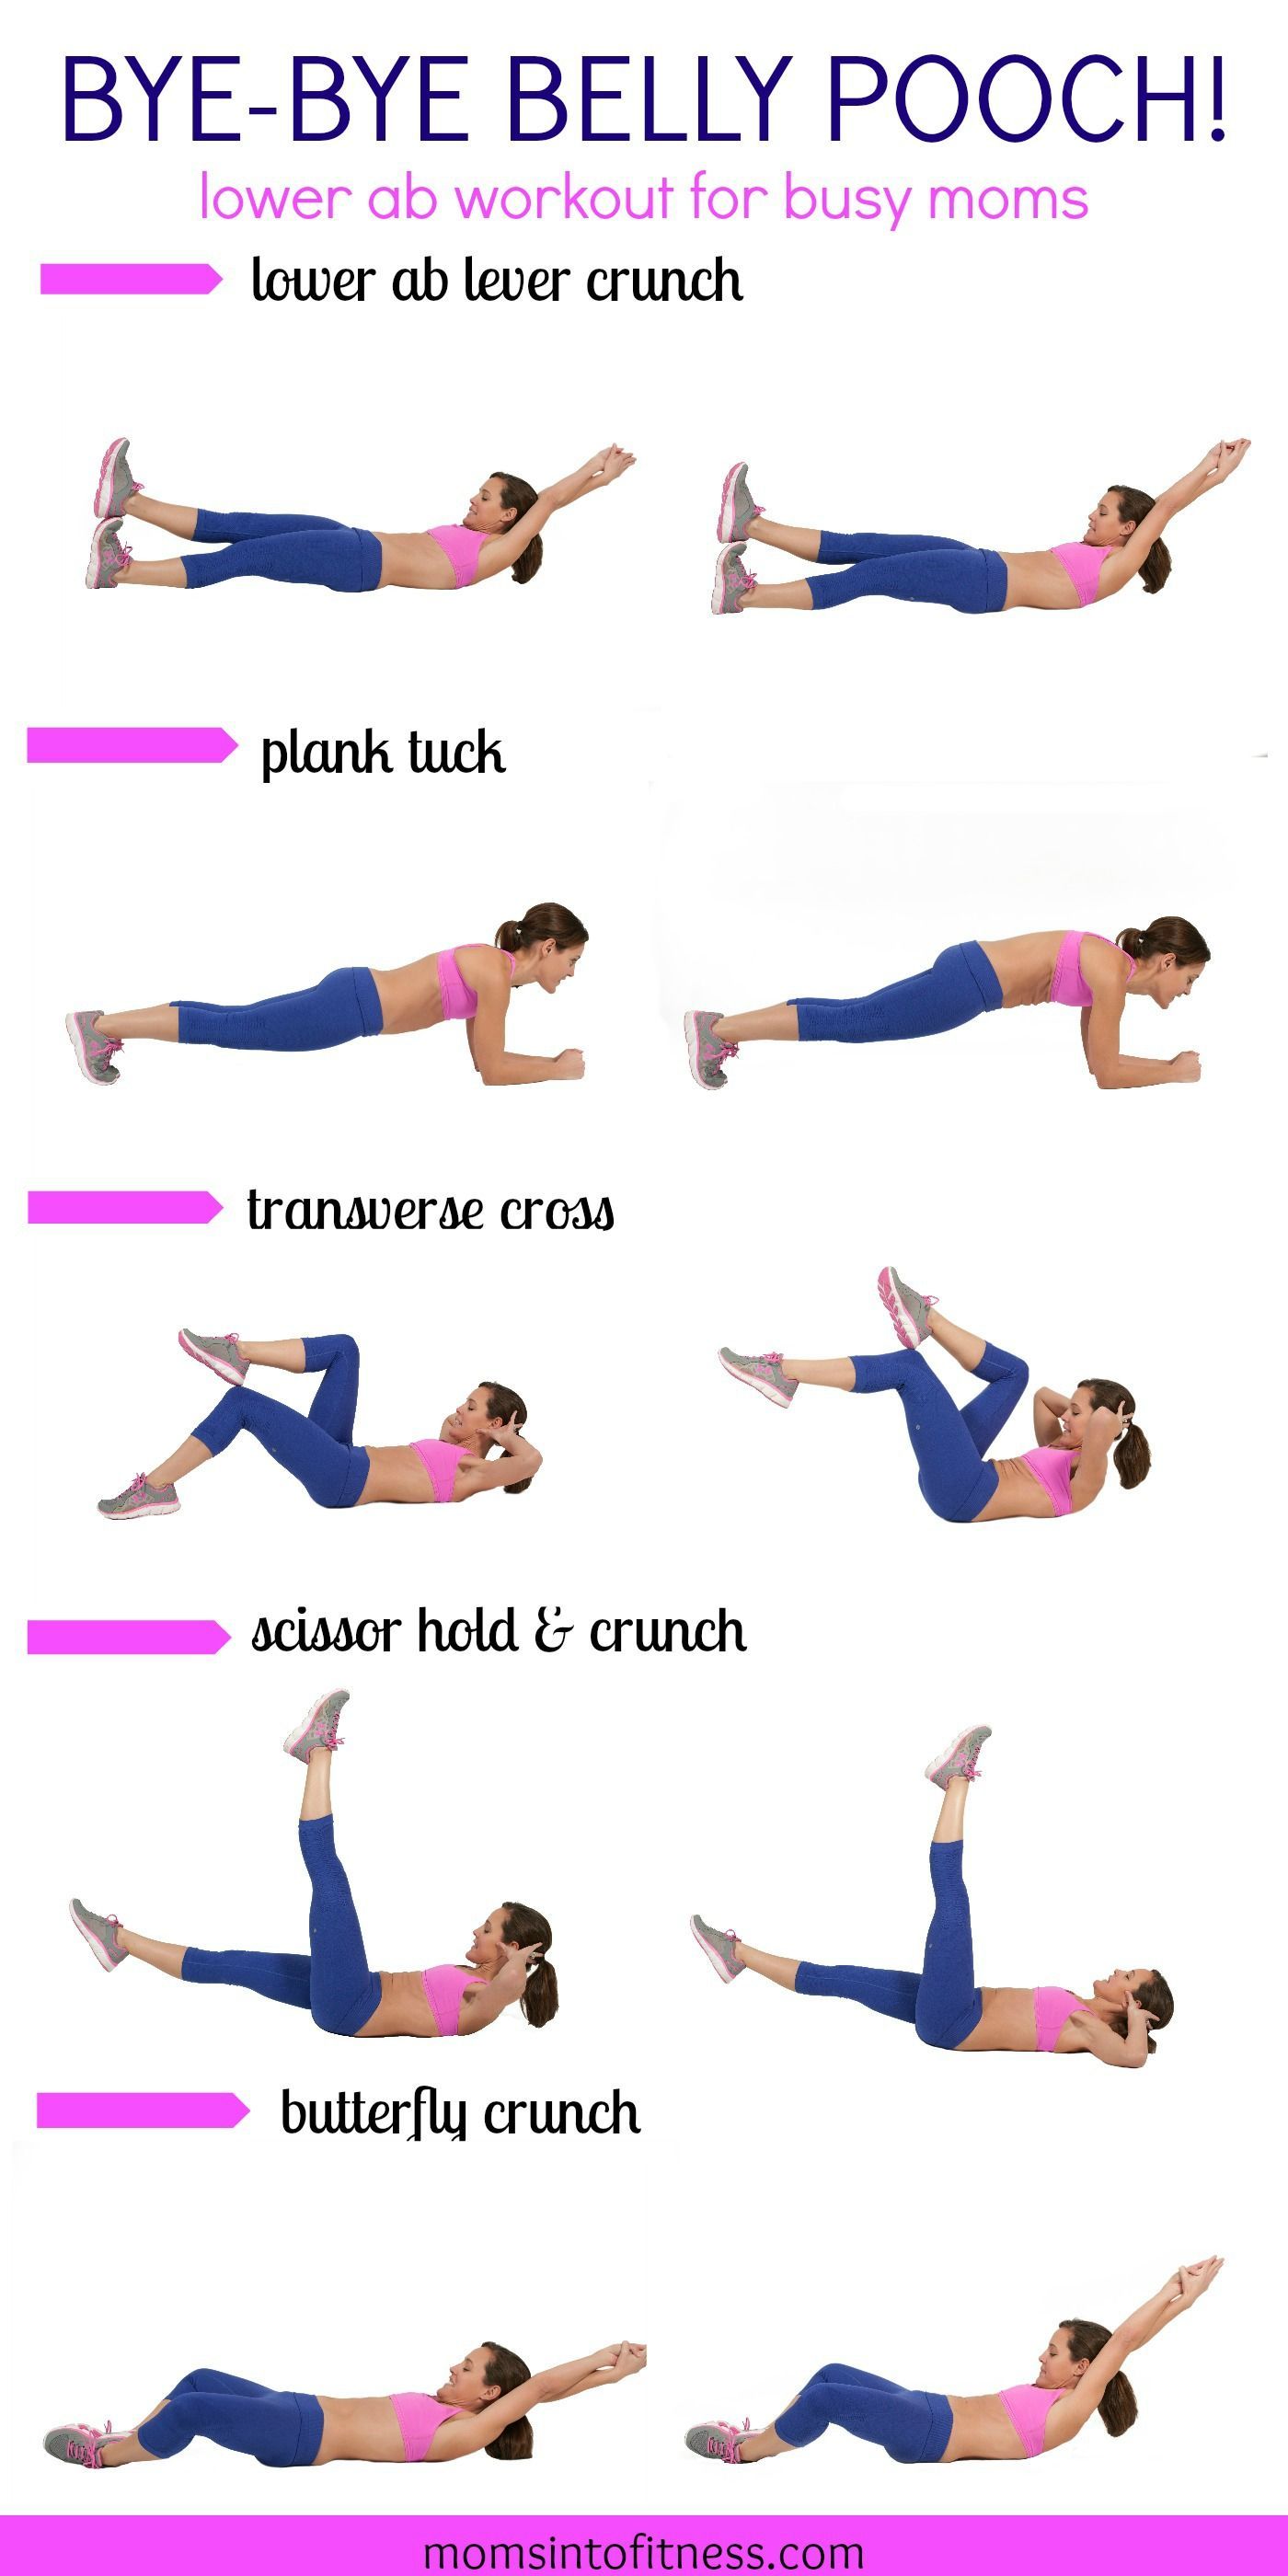 Lower ab workout